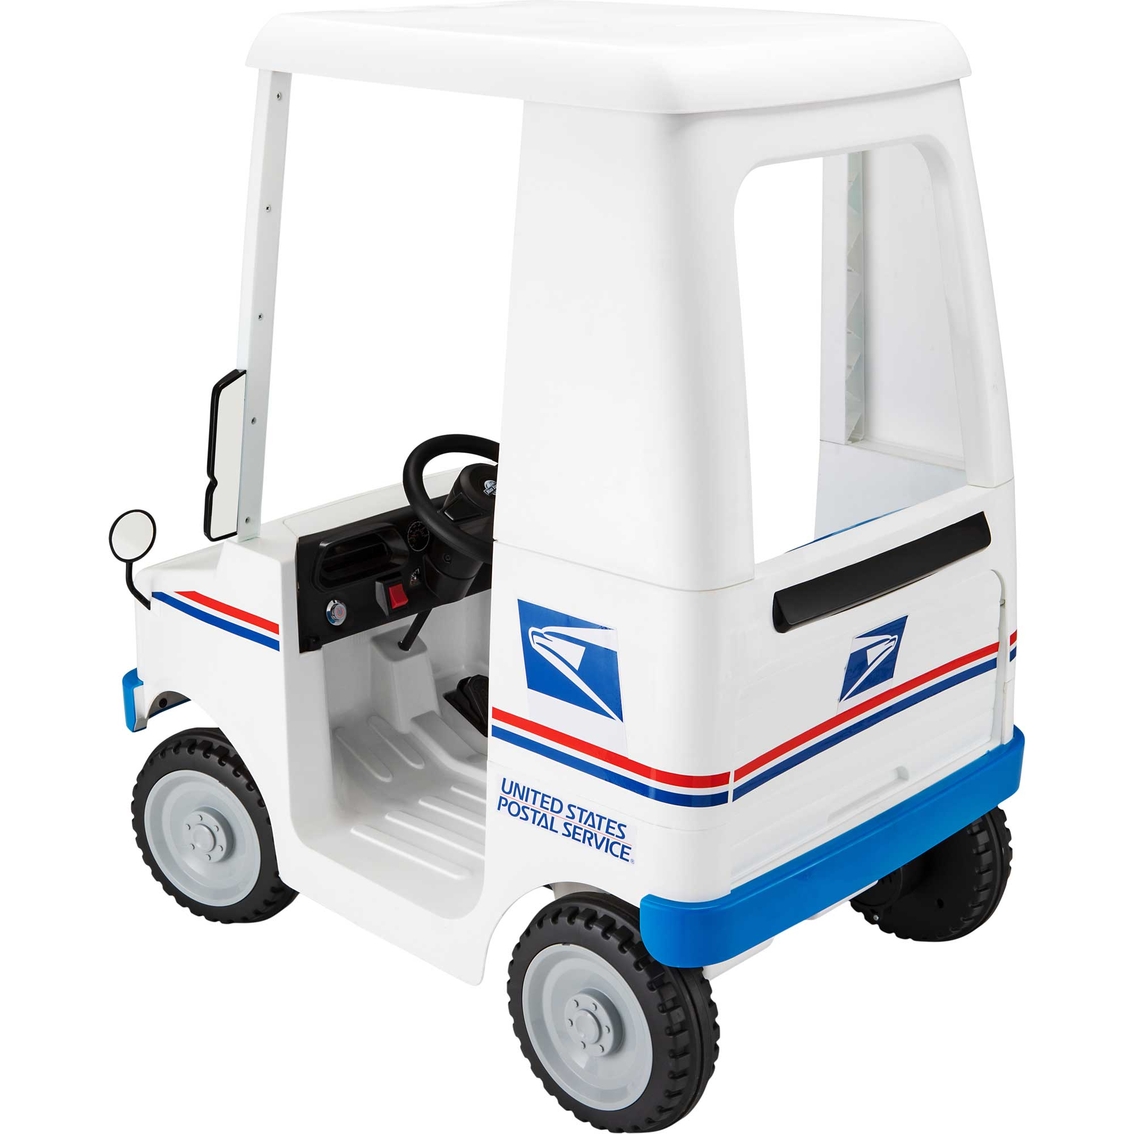 KidTrax US Postal Service 6 Volt Mail Delivery Truck Electric Ride On Toy - Image 4 of 4